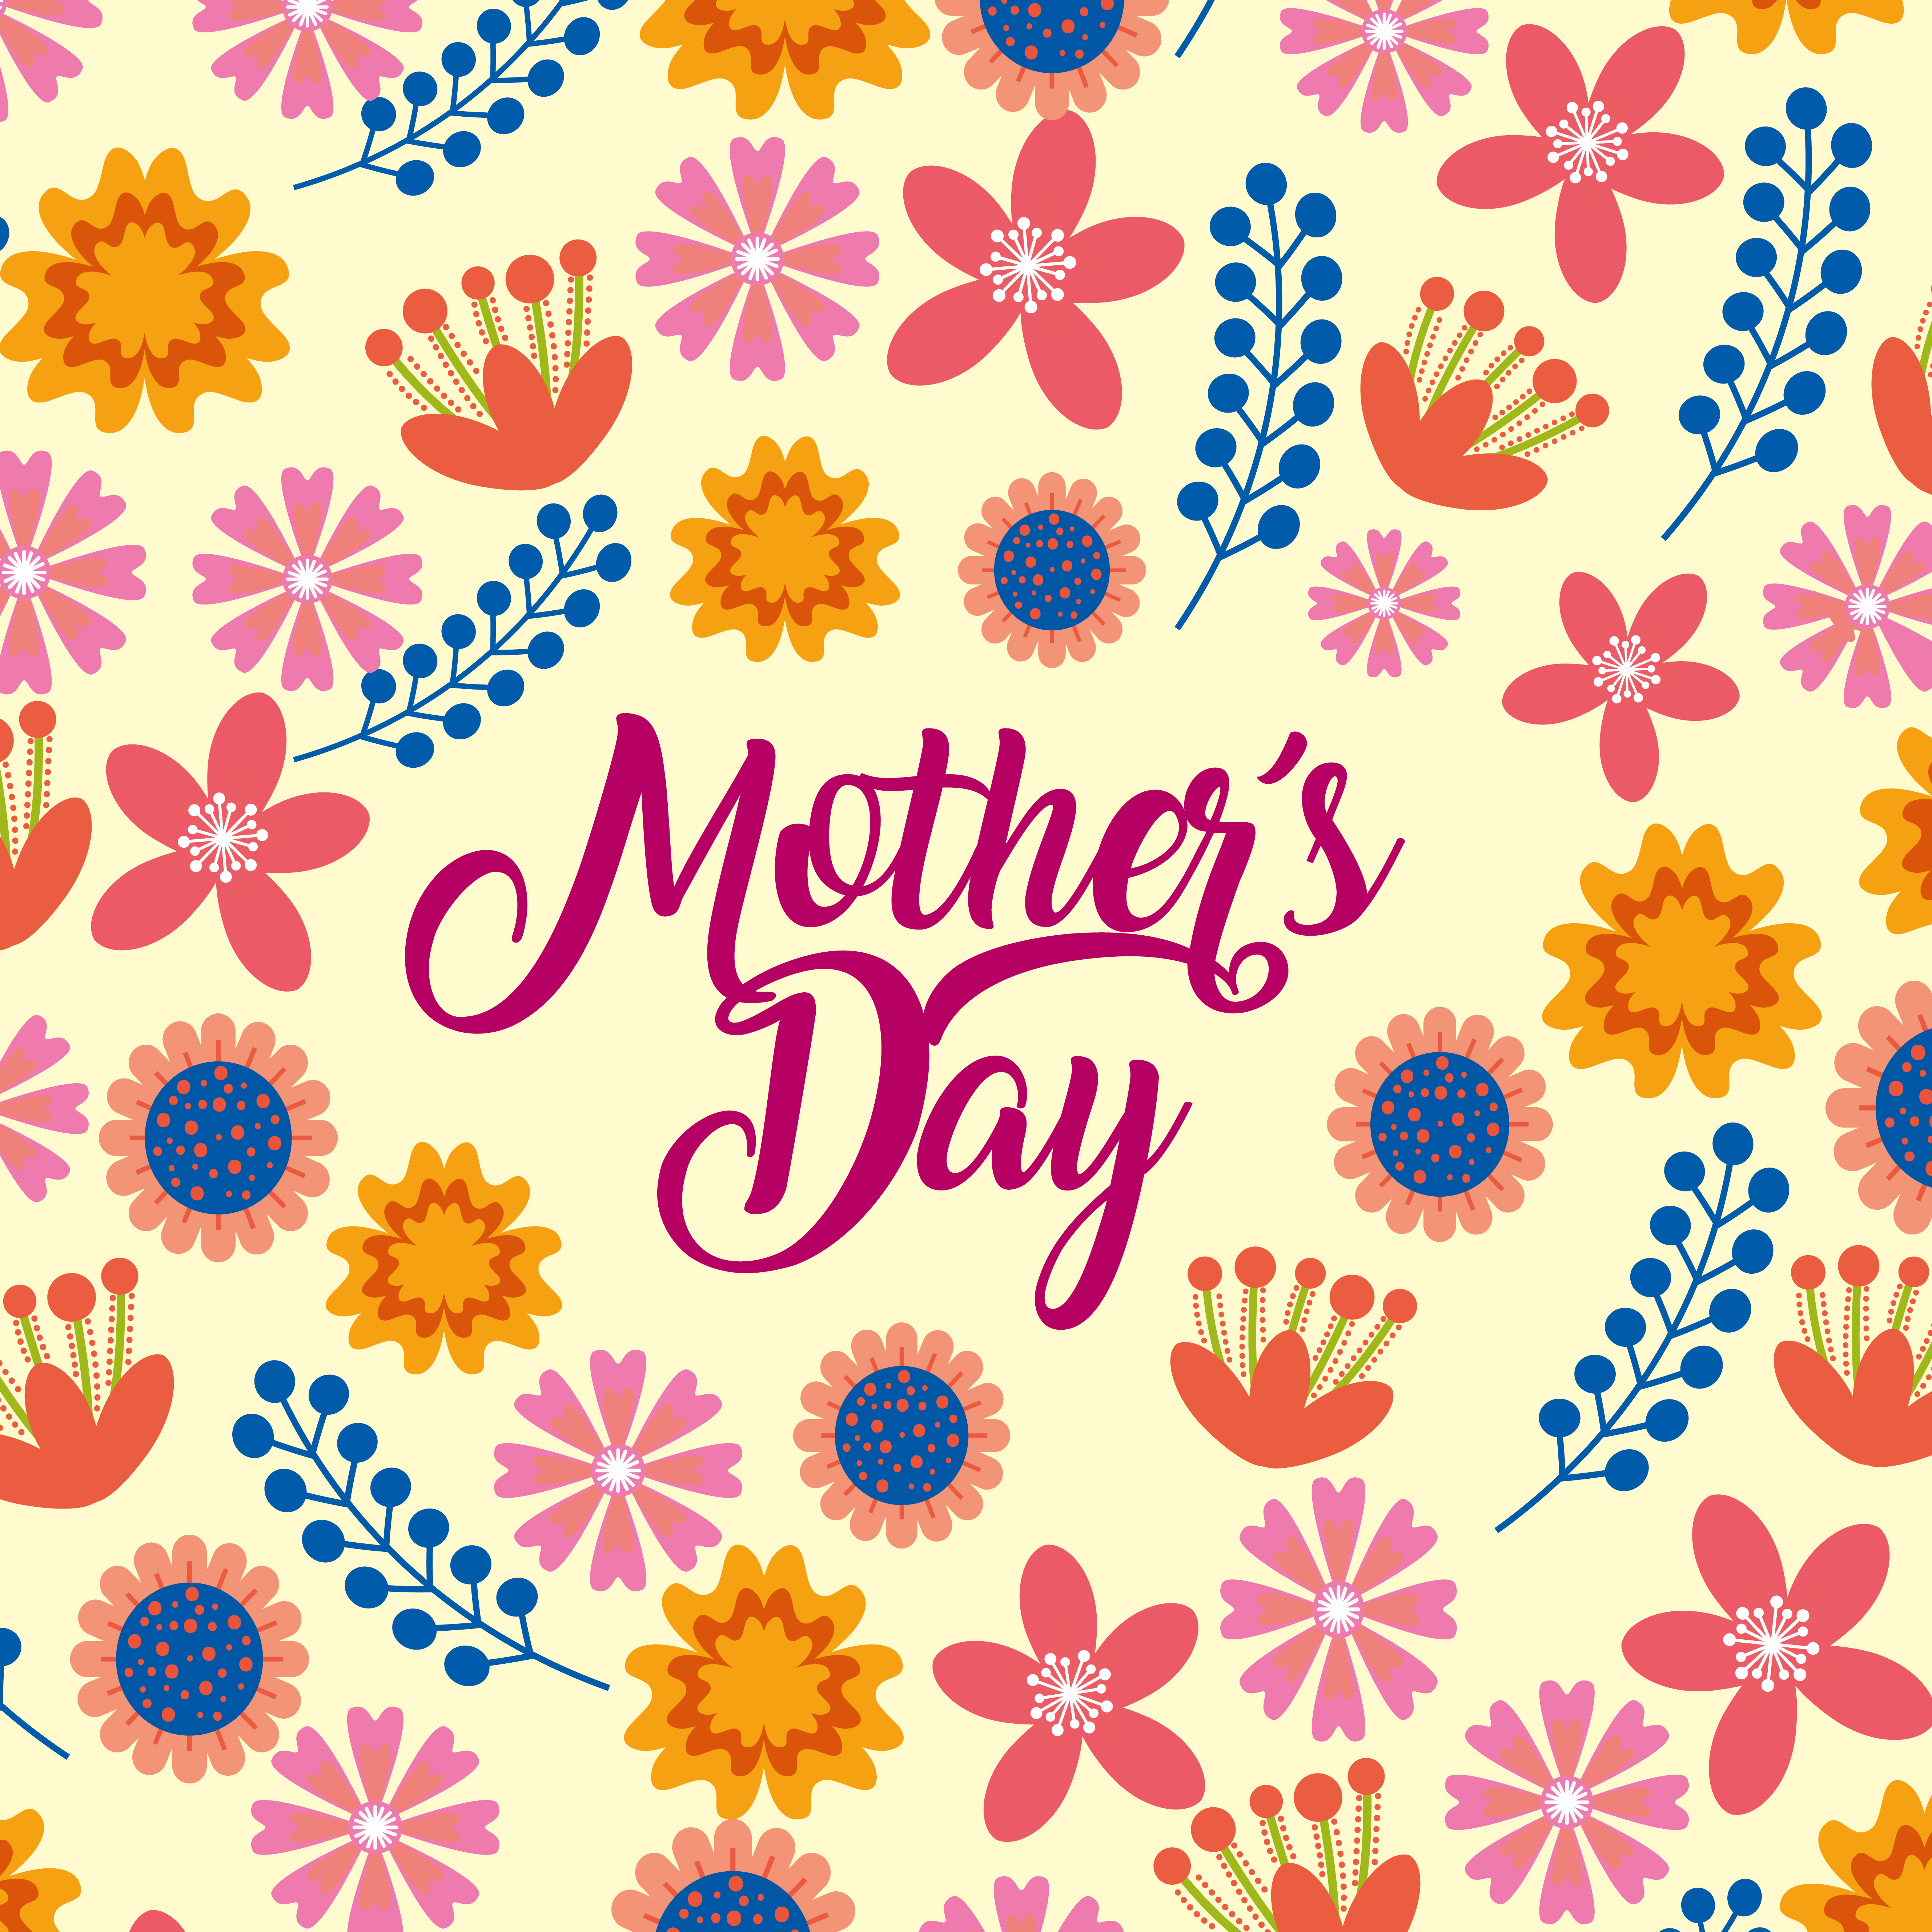 Download mothers day card - Download Free Vectors, Clipart Graphics ...